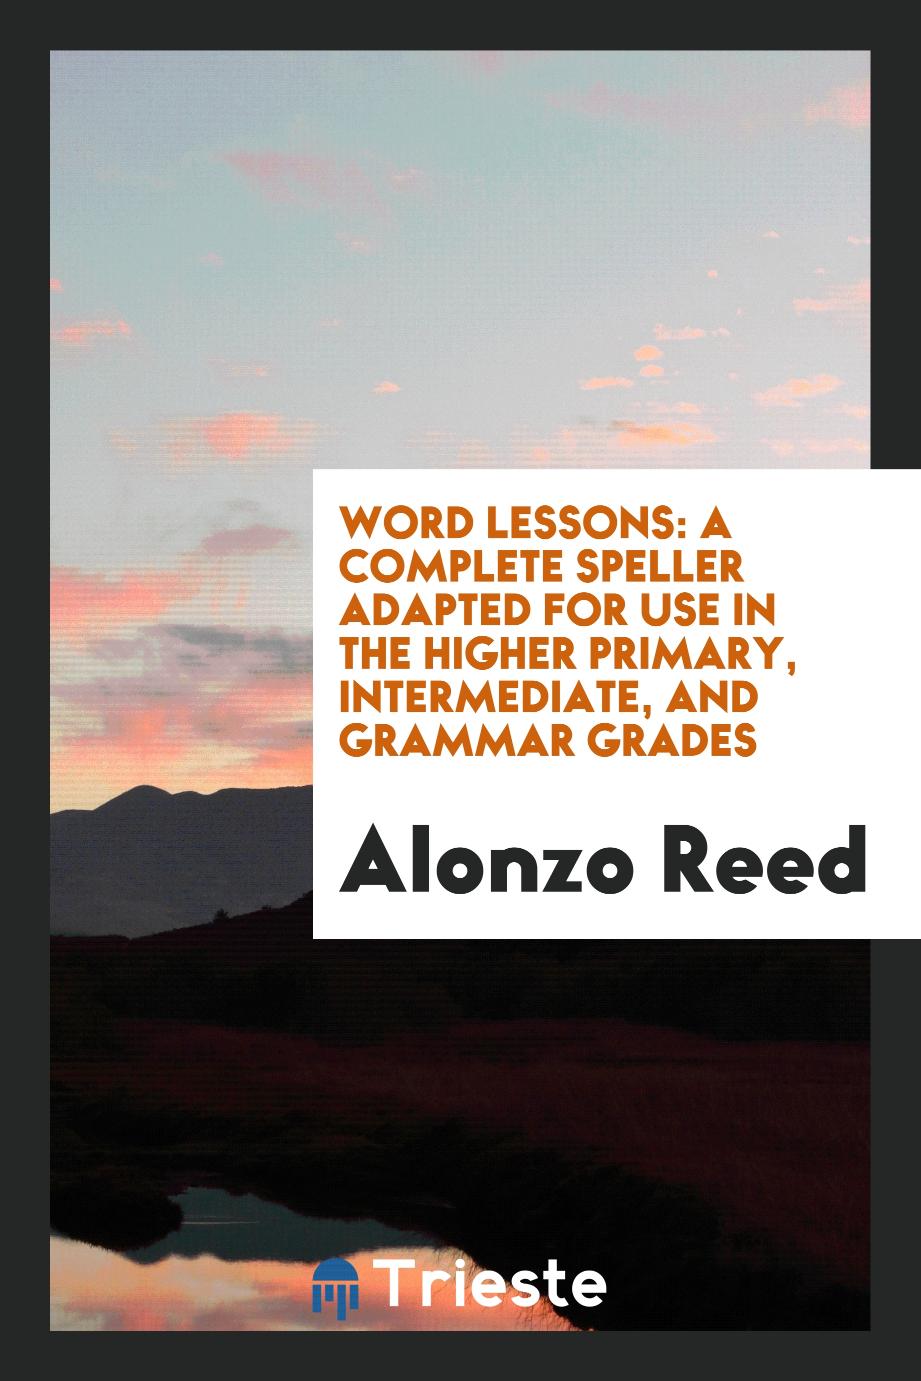 Word Lessons: A Complete Speller Adapted for Use in the Higher Primary, Intermediate, and Grammar Grades